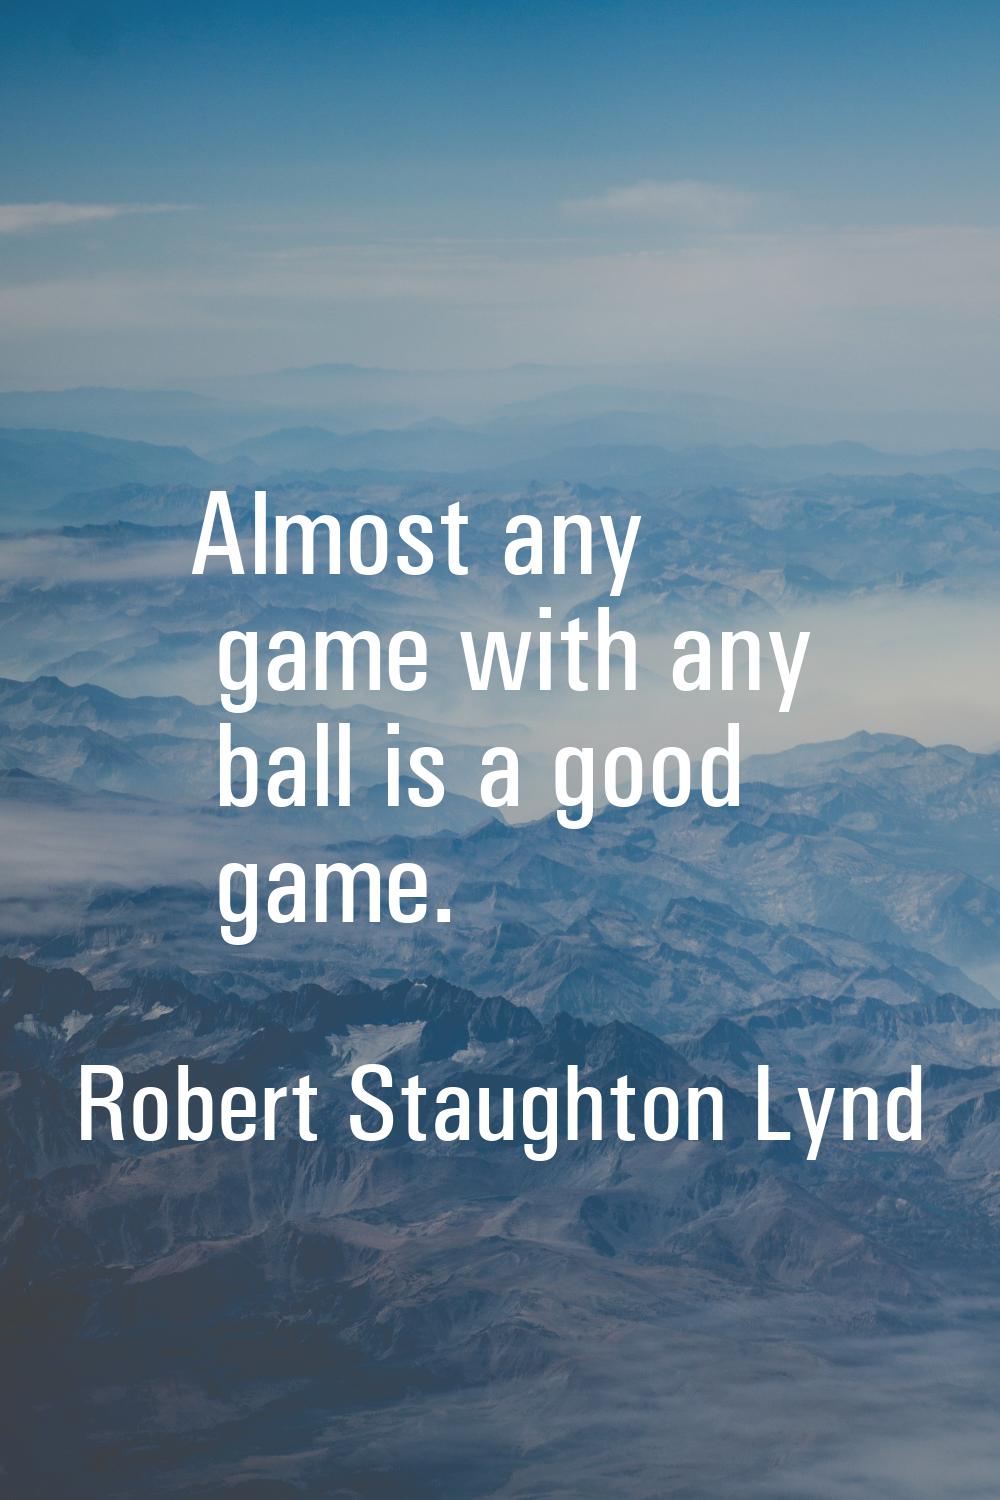 Almost any game with any ball is a good game.